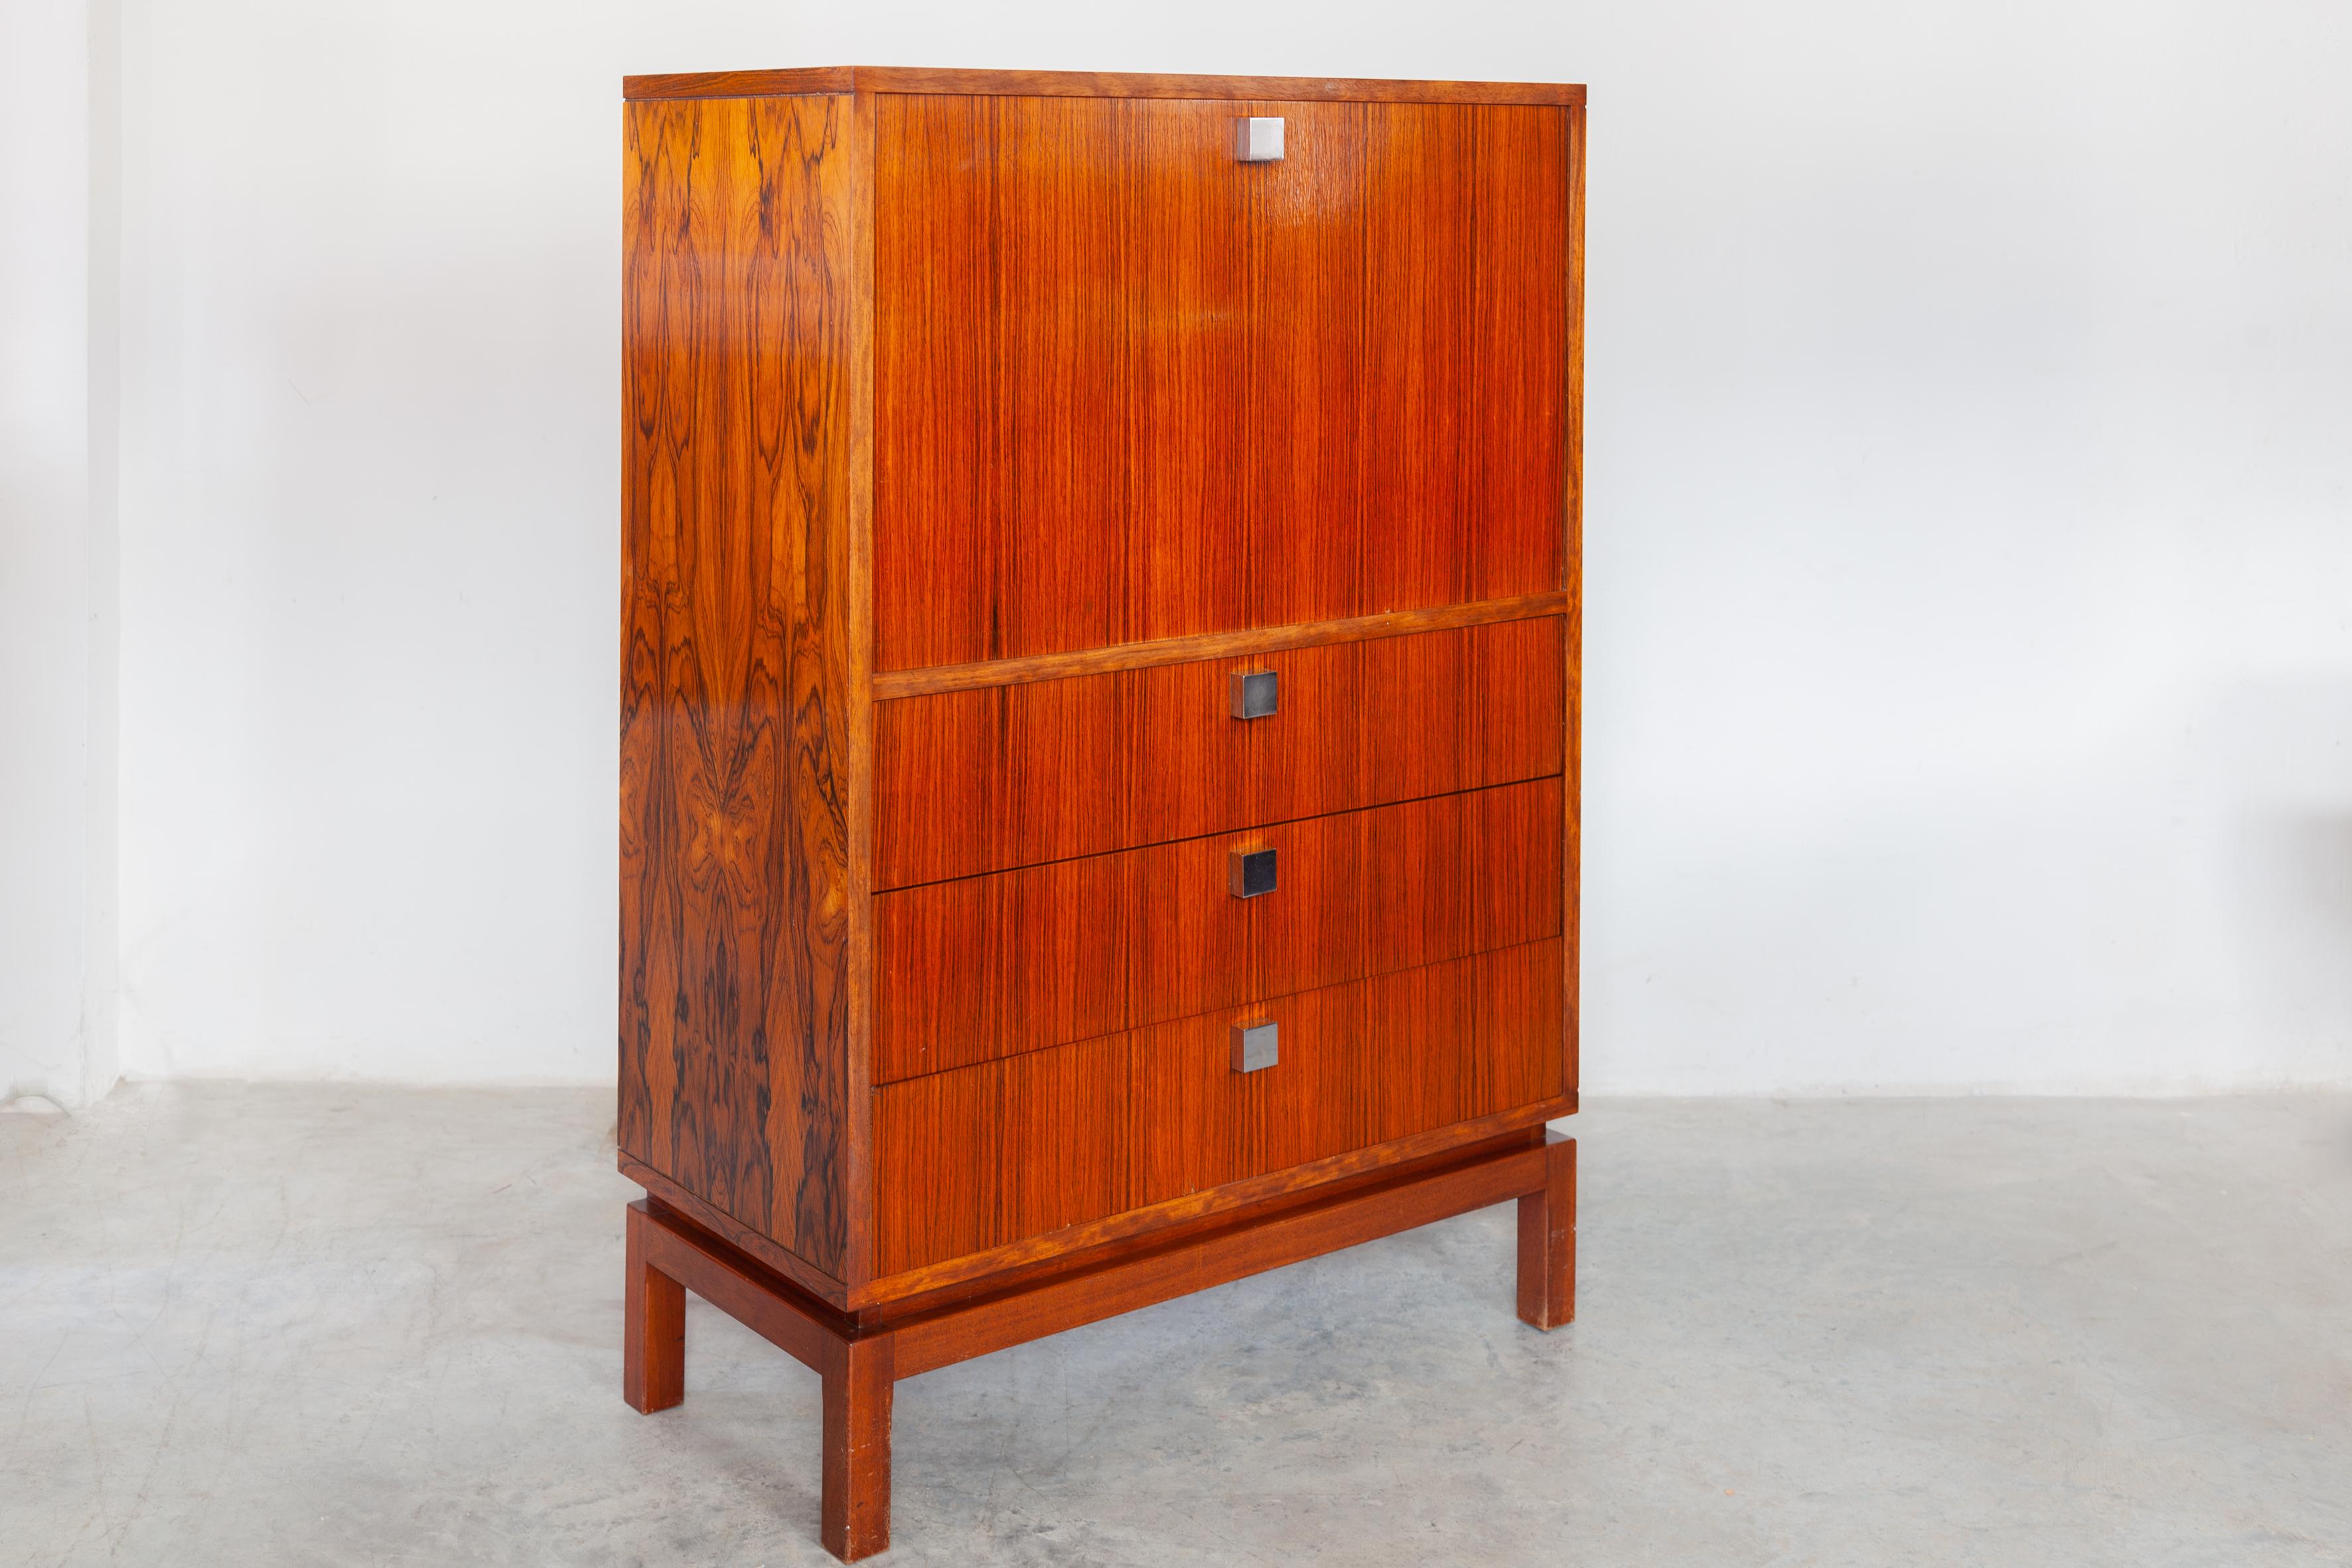 Hand-Crafted High Side-Board with Mini Bar by Alfred Hendrickx for Belform, Belgium, 1960's